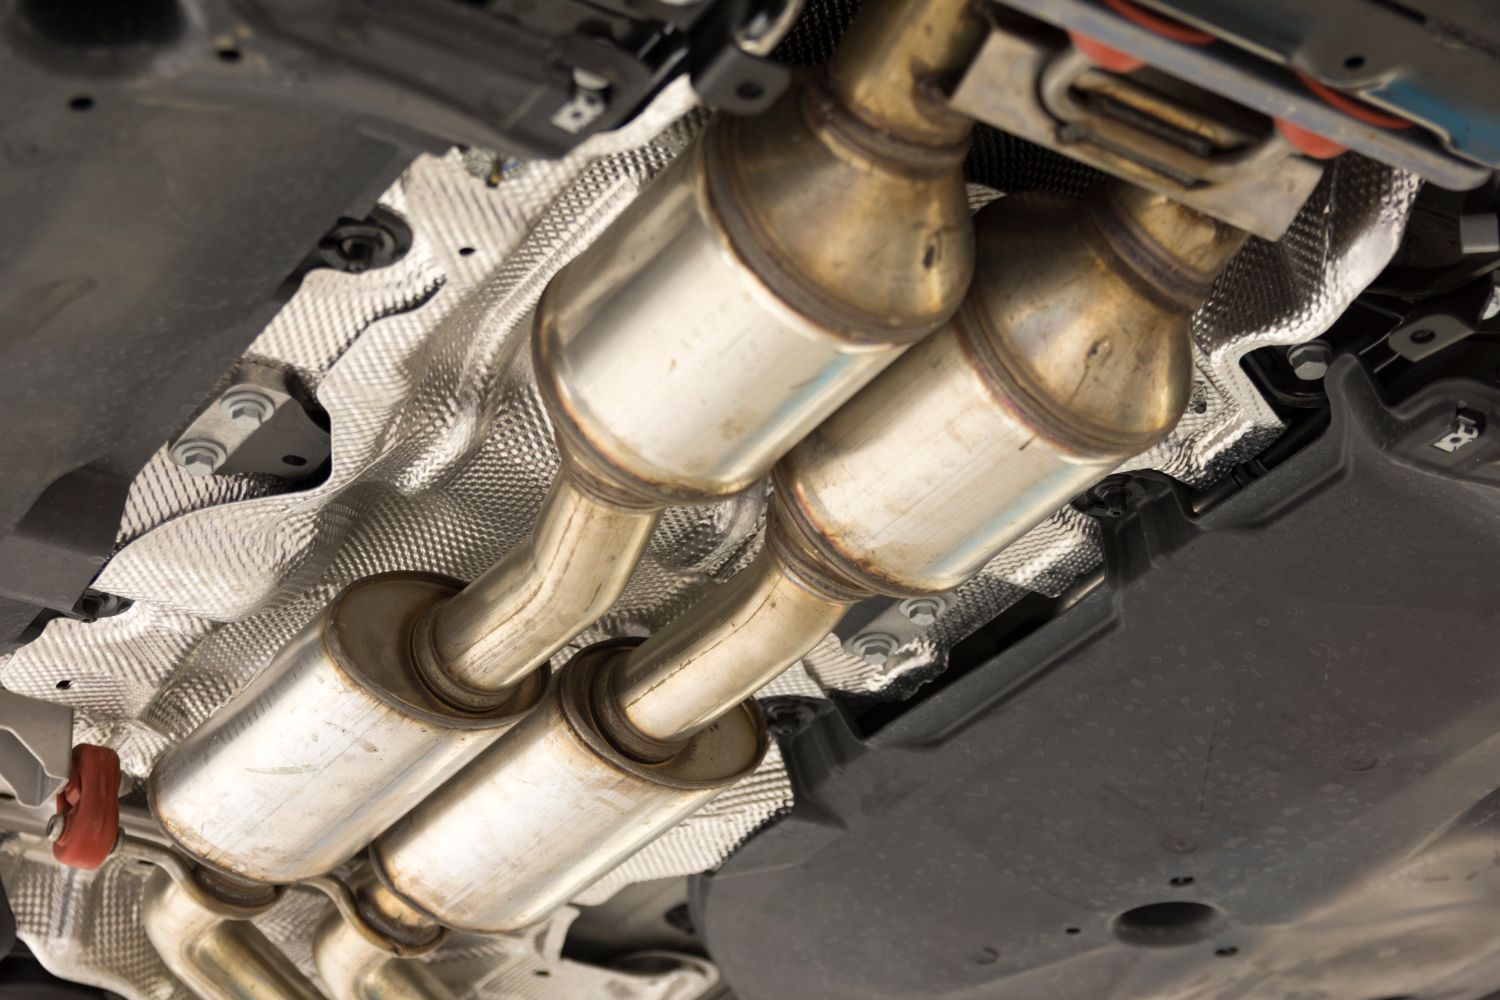 Who Pays the Most for Catalytic Converters?